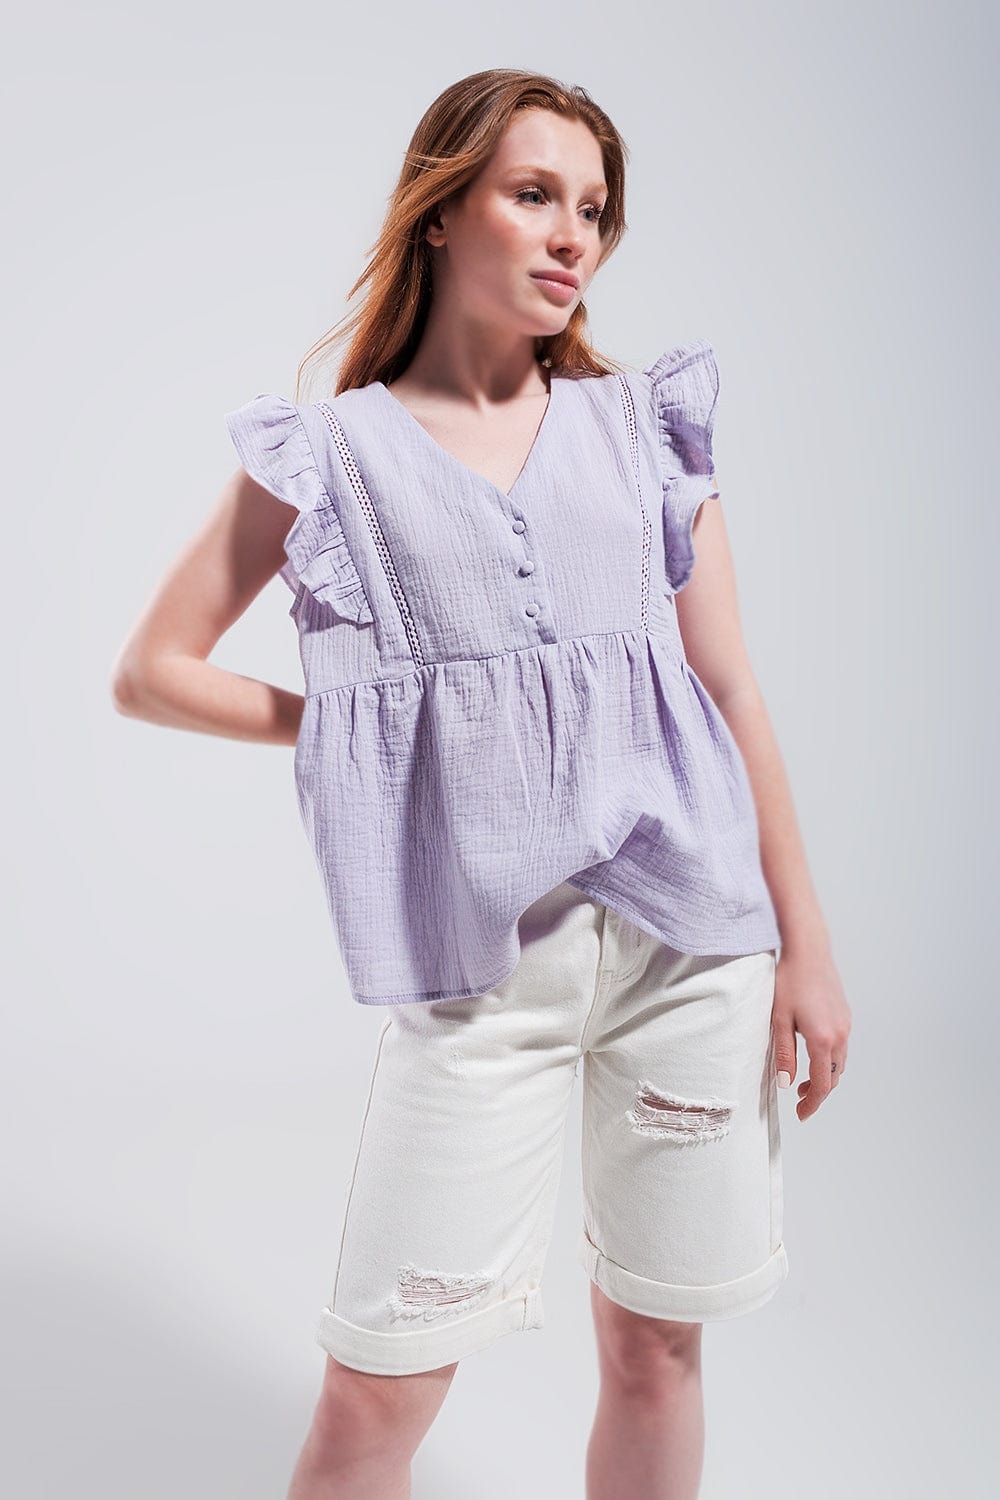 Q2 Women's Blouse Cotton Tank Top with Ruffle Sleeves in Lilac